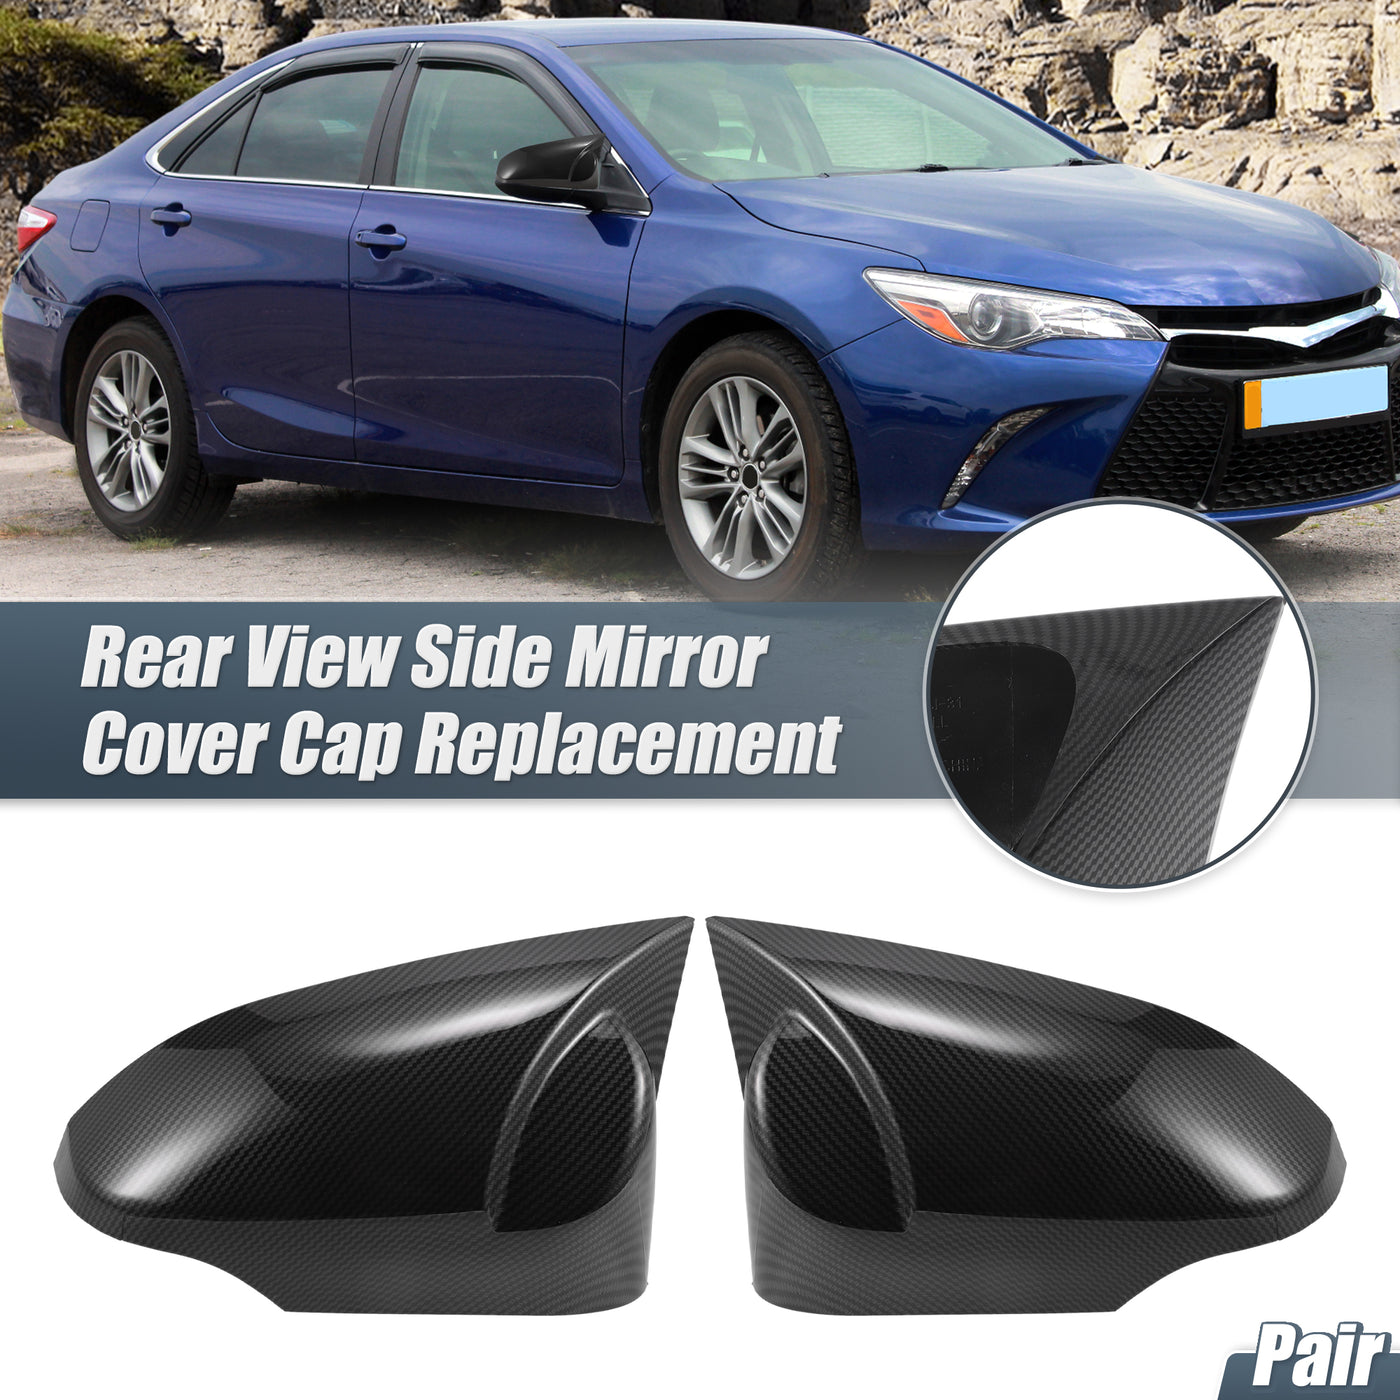 X AUTOHAUX Pair Car Rear View Driver Passenger Side Mirror Cover Cap Overlay Black Carbon Fiber Pattern for Toyota Camry Venza Avalon Corolla Yaris Mirror Guard Covers Exterior Decoration